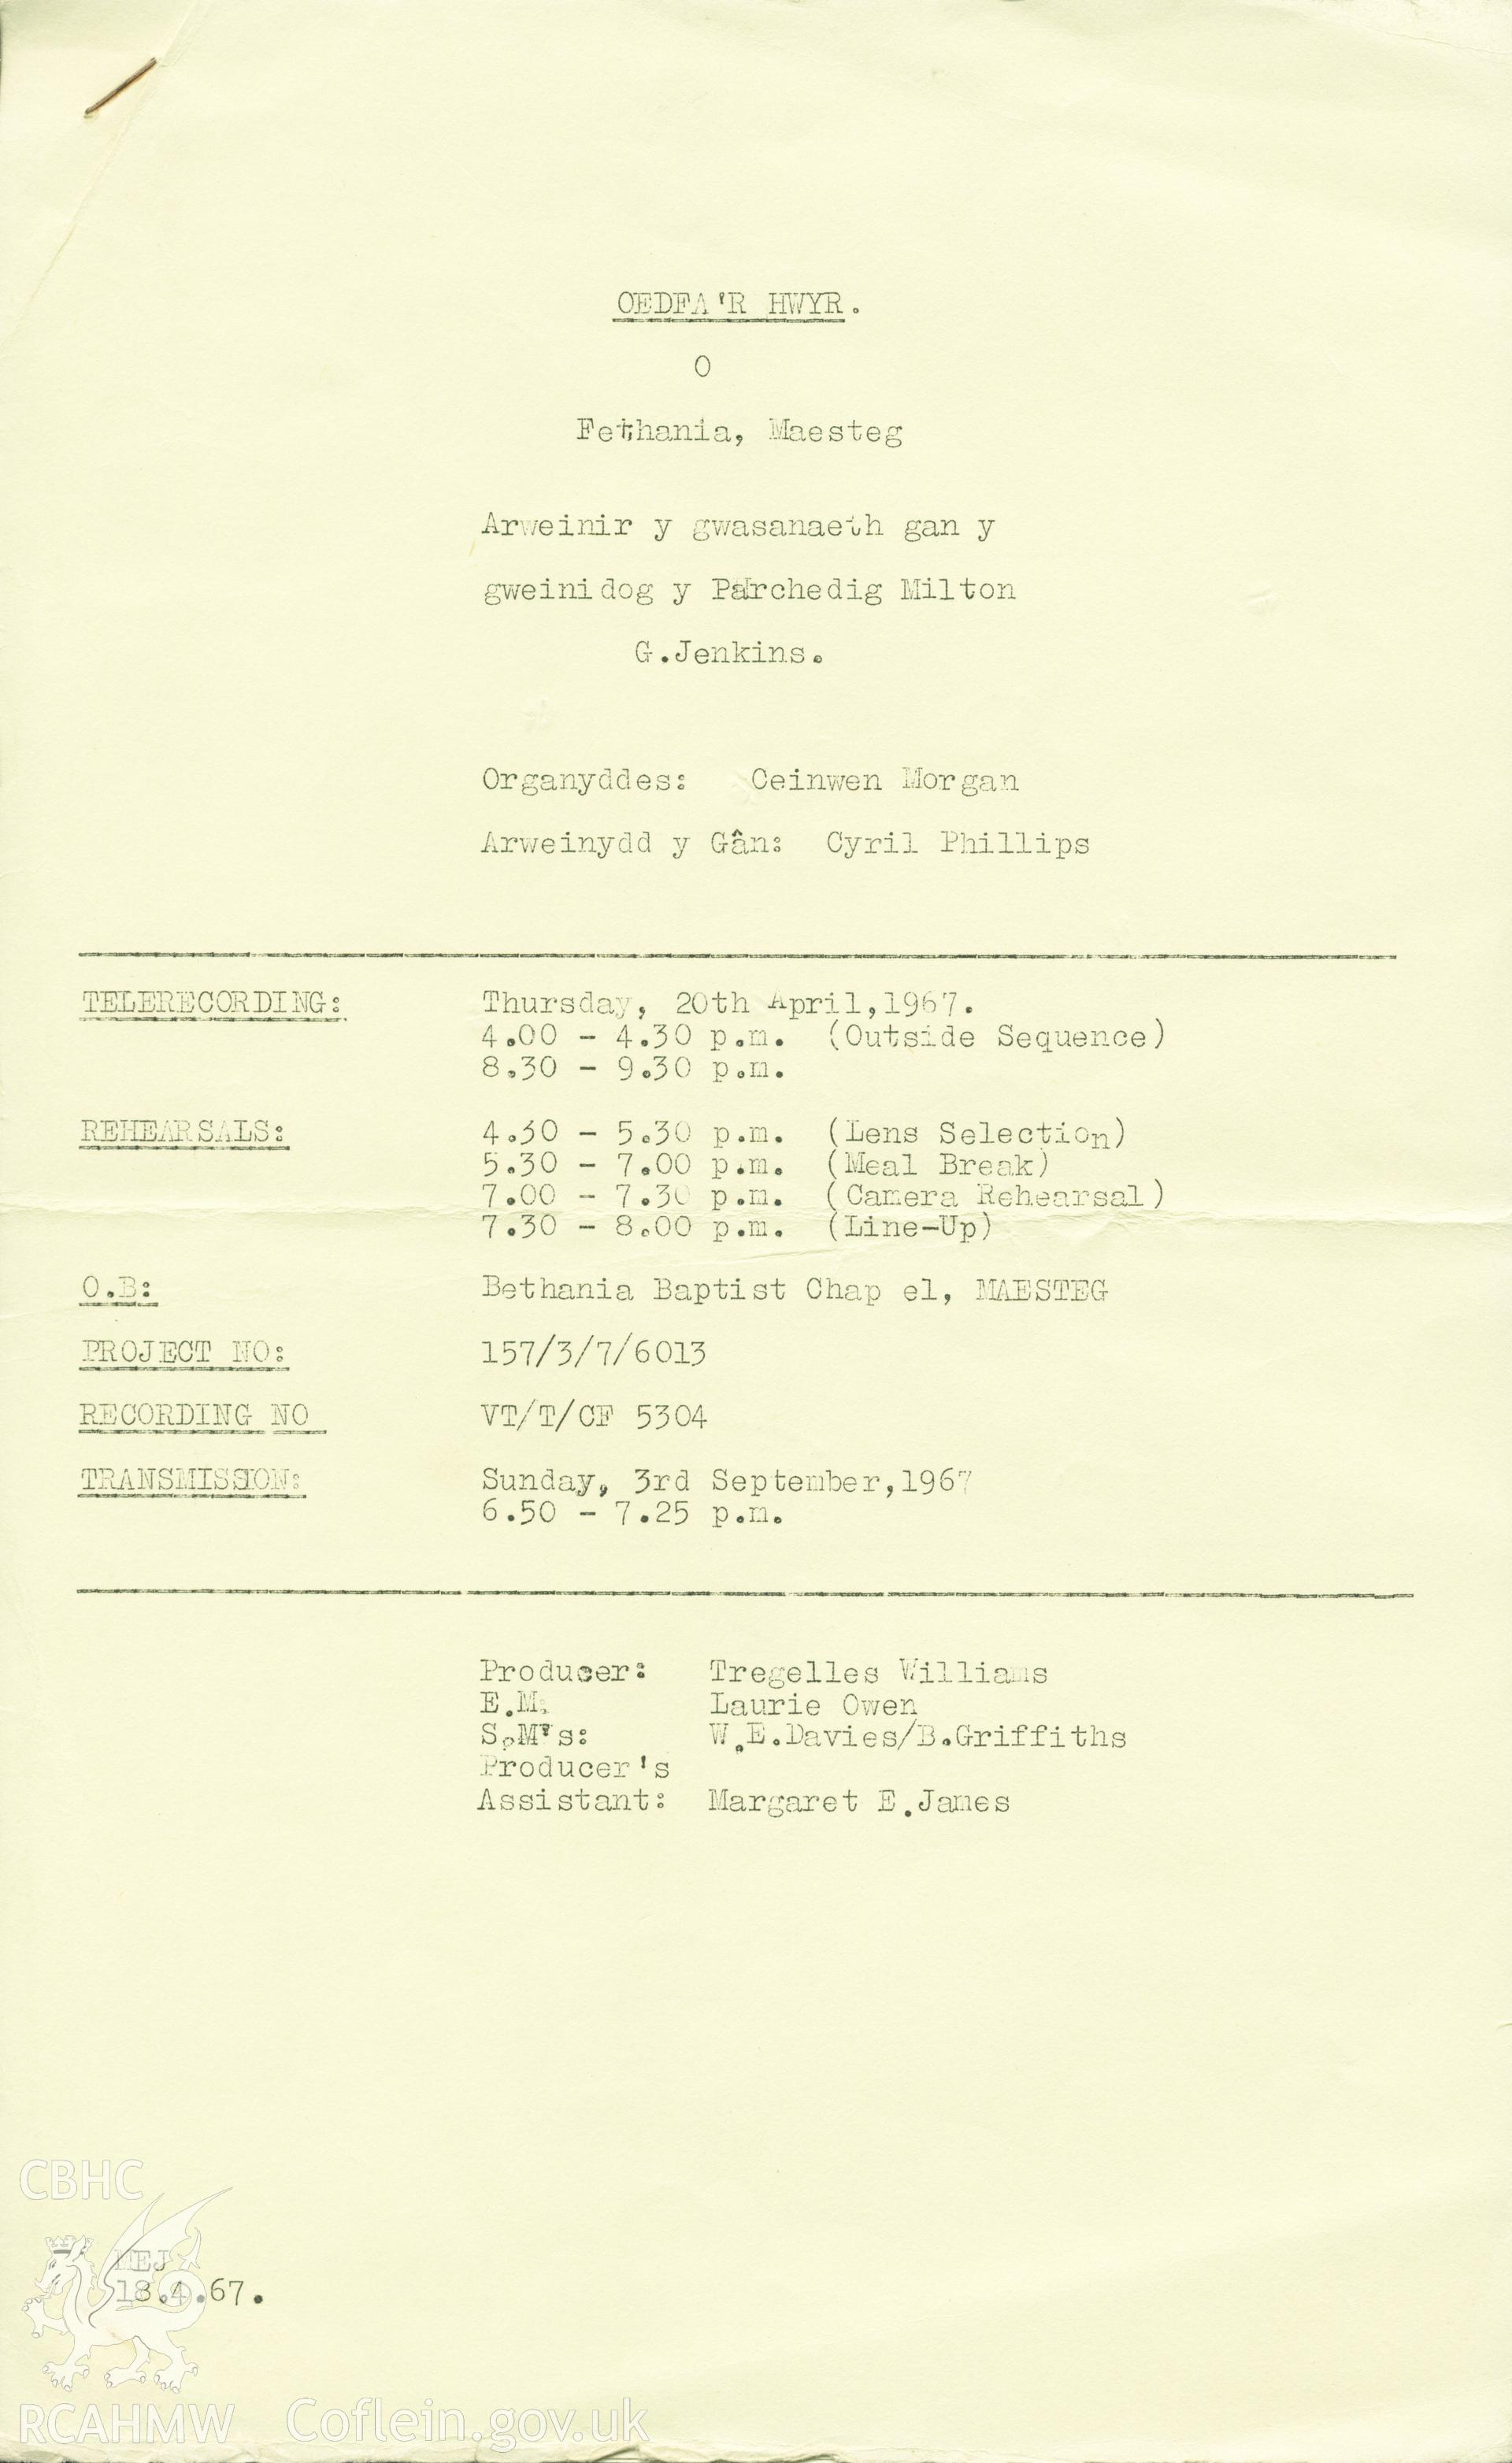 Copy of running order of service on 20th April 1967, recorded by the BBC and broadcast on 3rd September, 1967. Donated to the RCAHMW by Cyril Philips as part of the Digital Dissent Project.